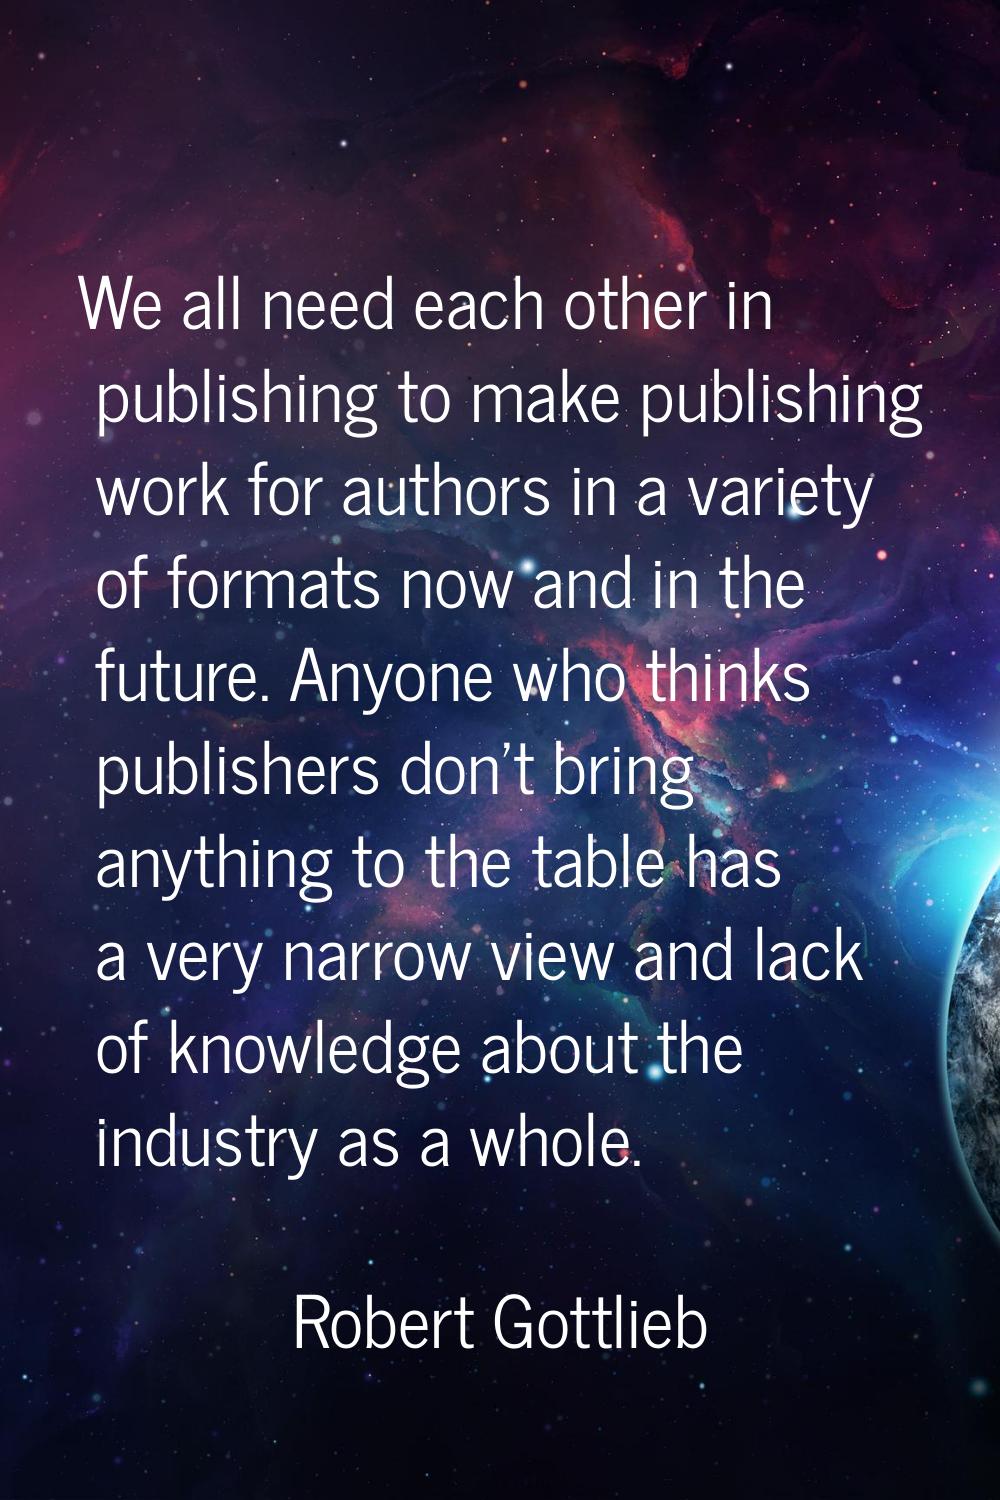 We all need each other in publishing to make publishing work for authors in a variety of formats no